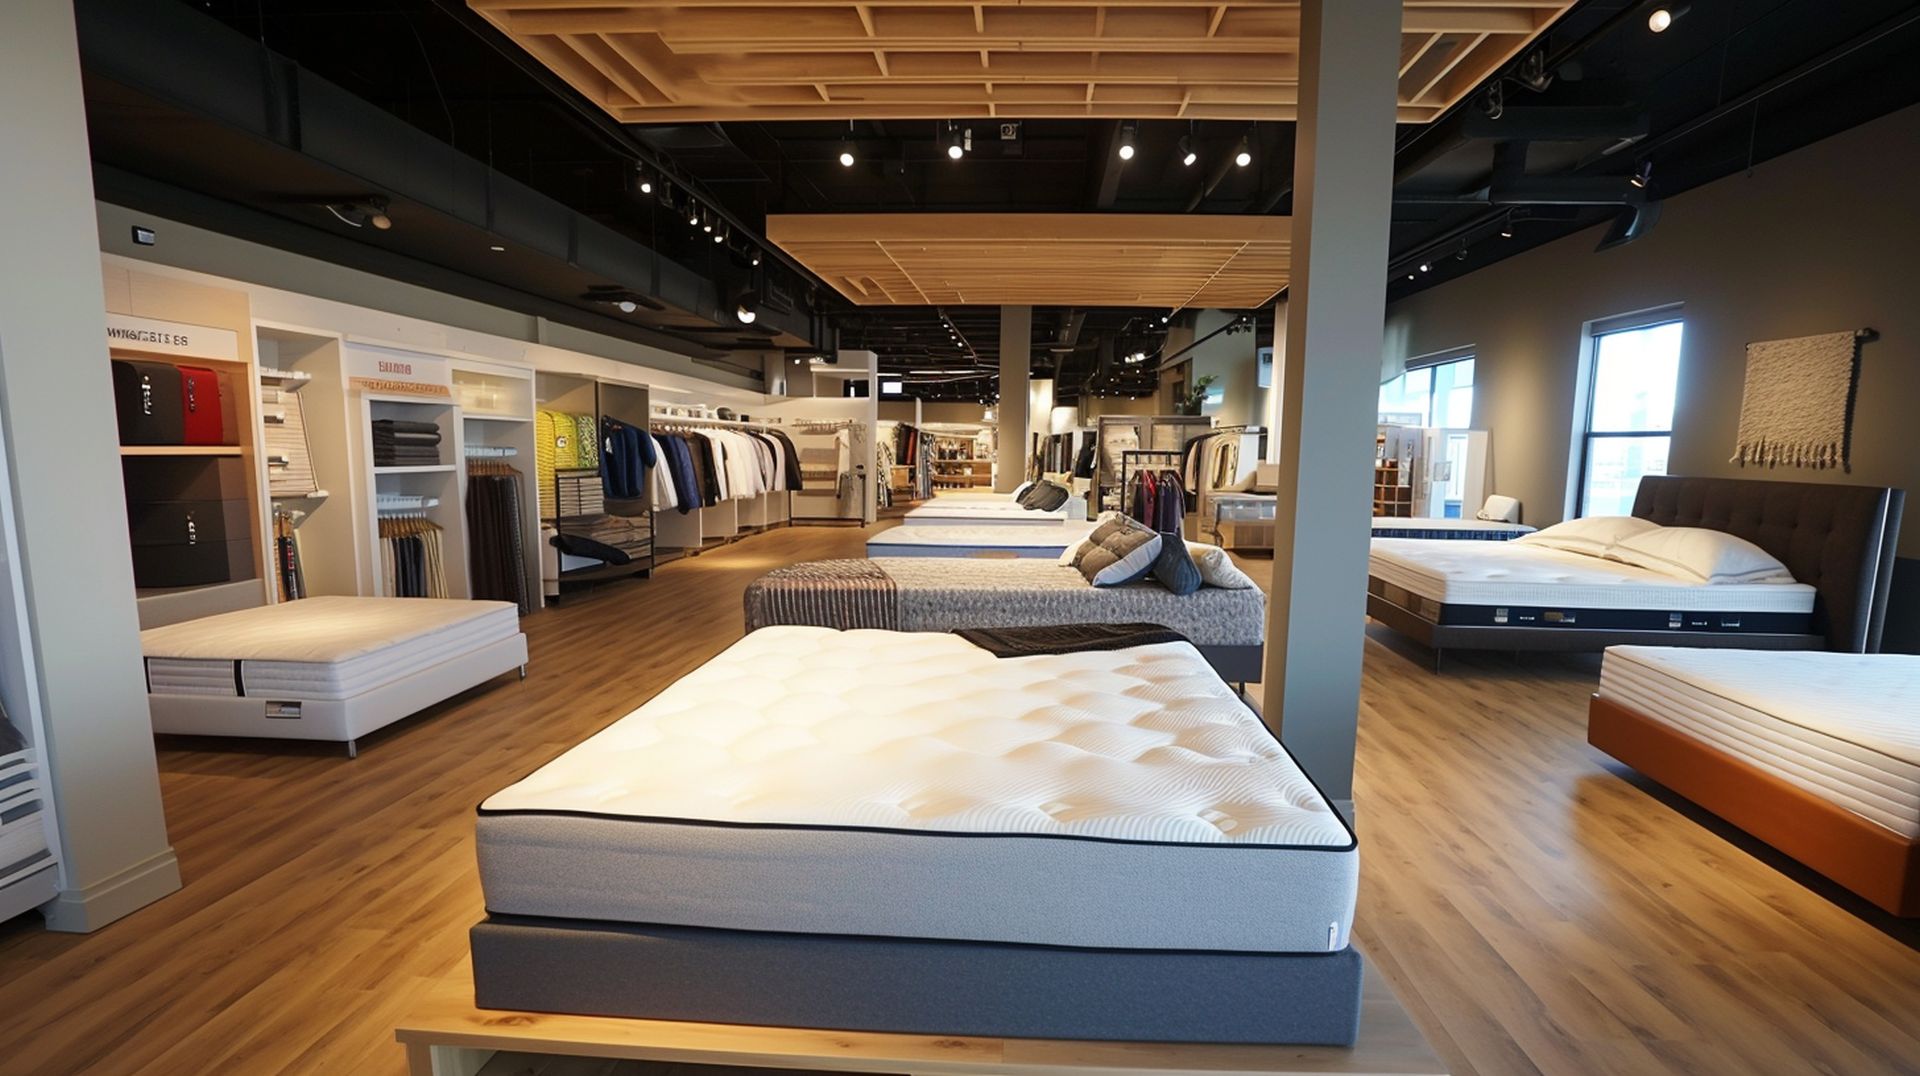 If you're looking for a new bed, mattress stores in Prescott offer the best customer and delivery service, financing, and warranties in Arizona